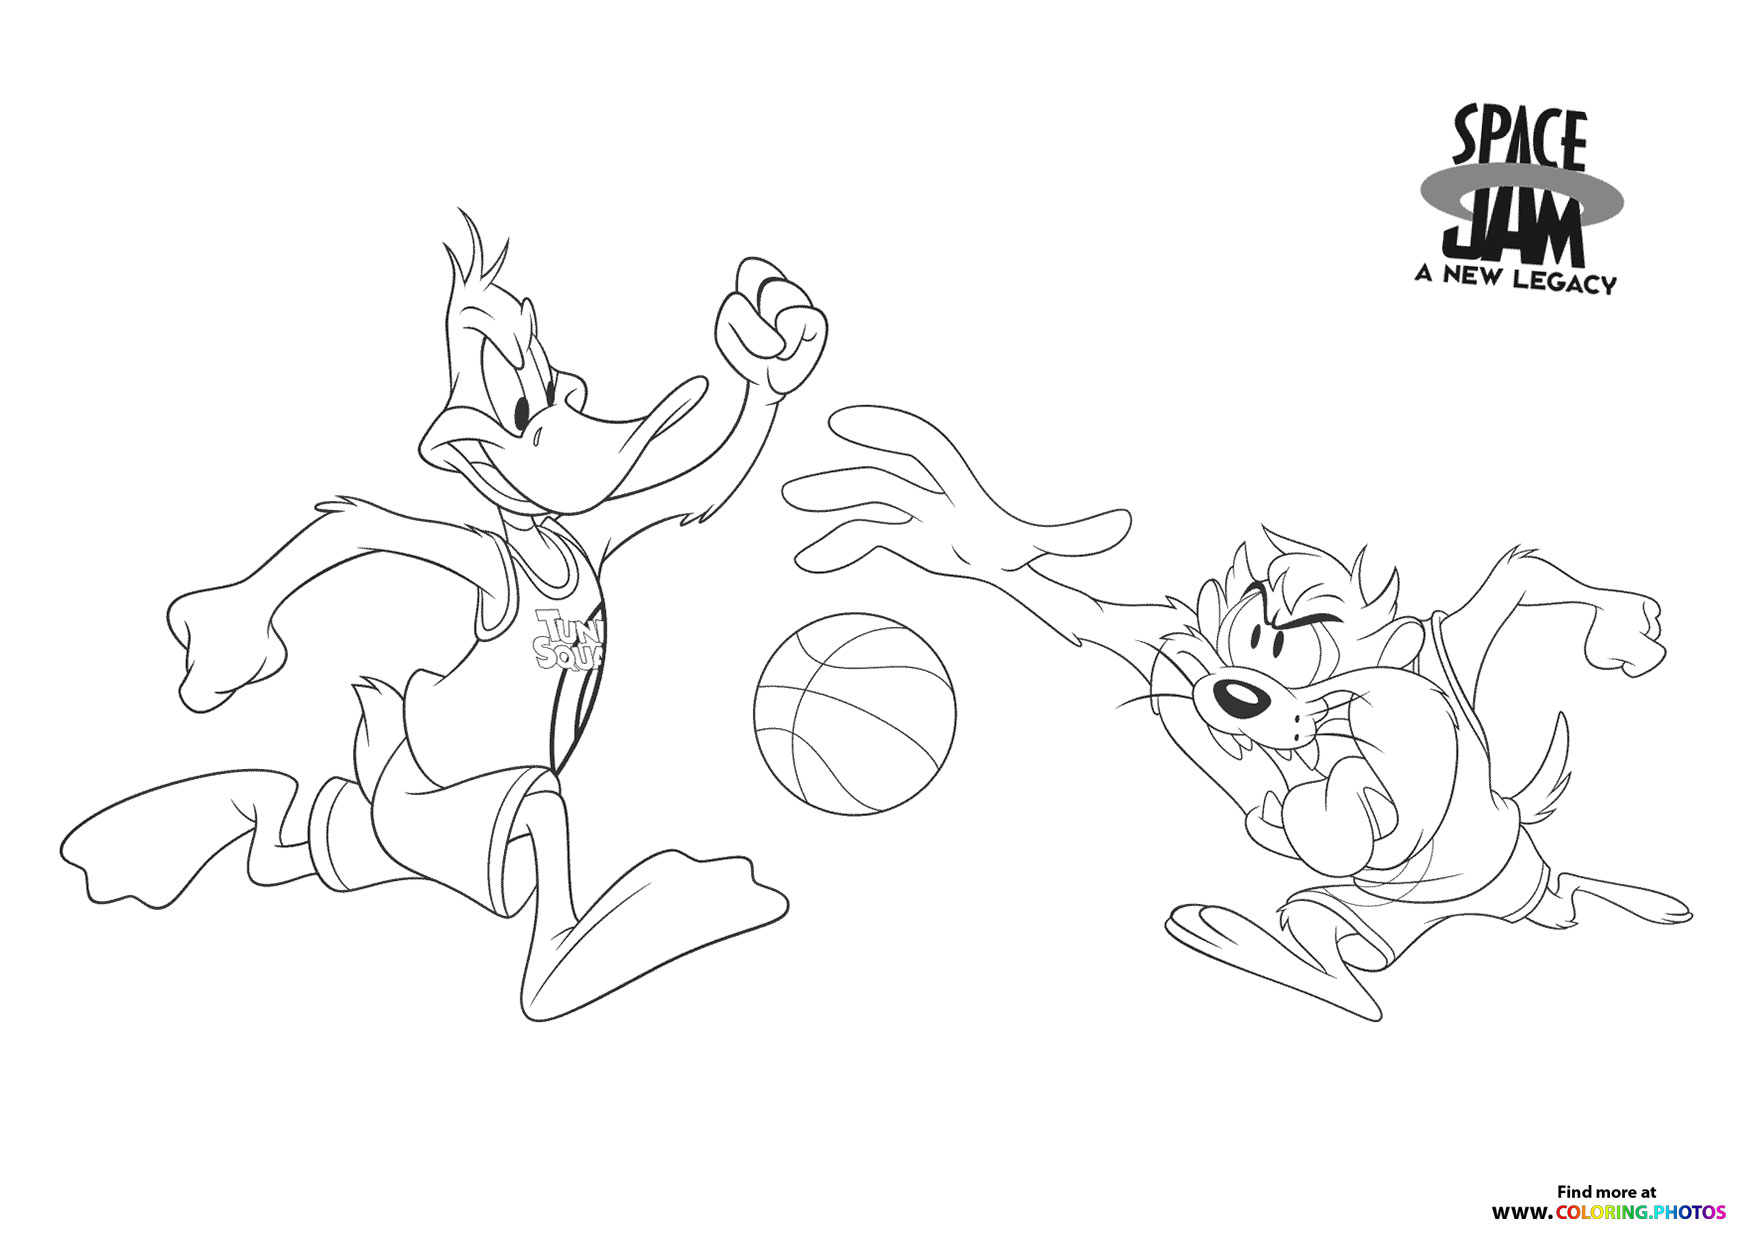 daffy and taz space jam a new legacy coloring pages for kids